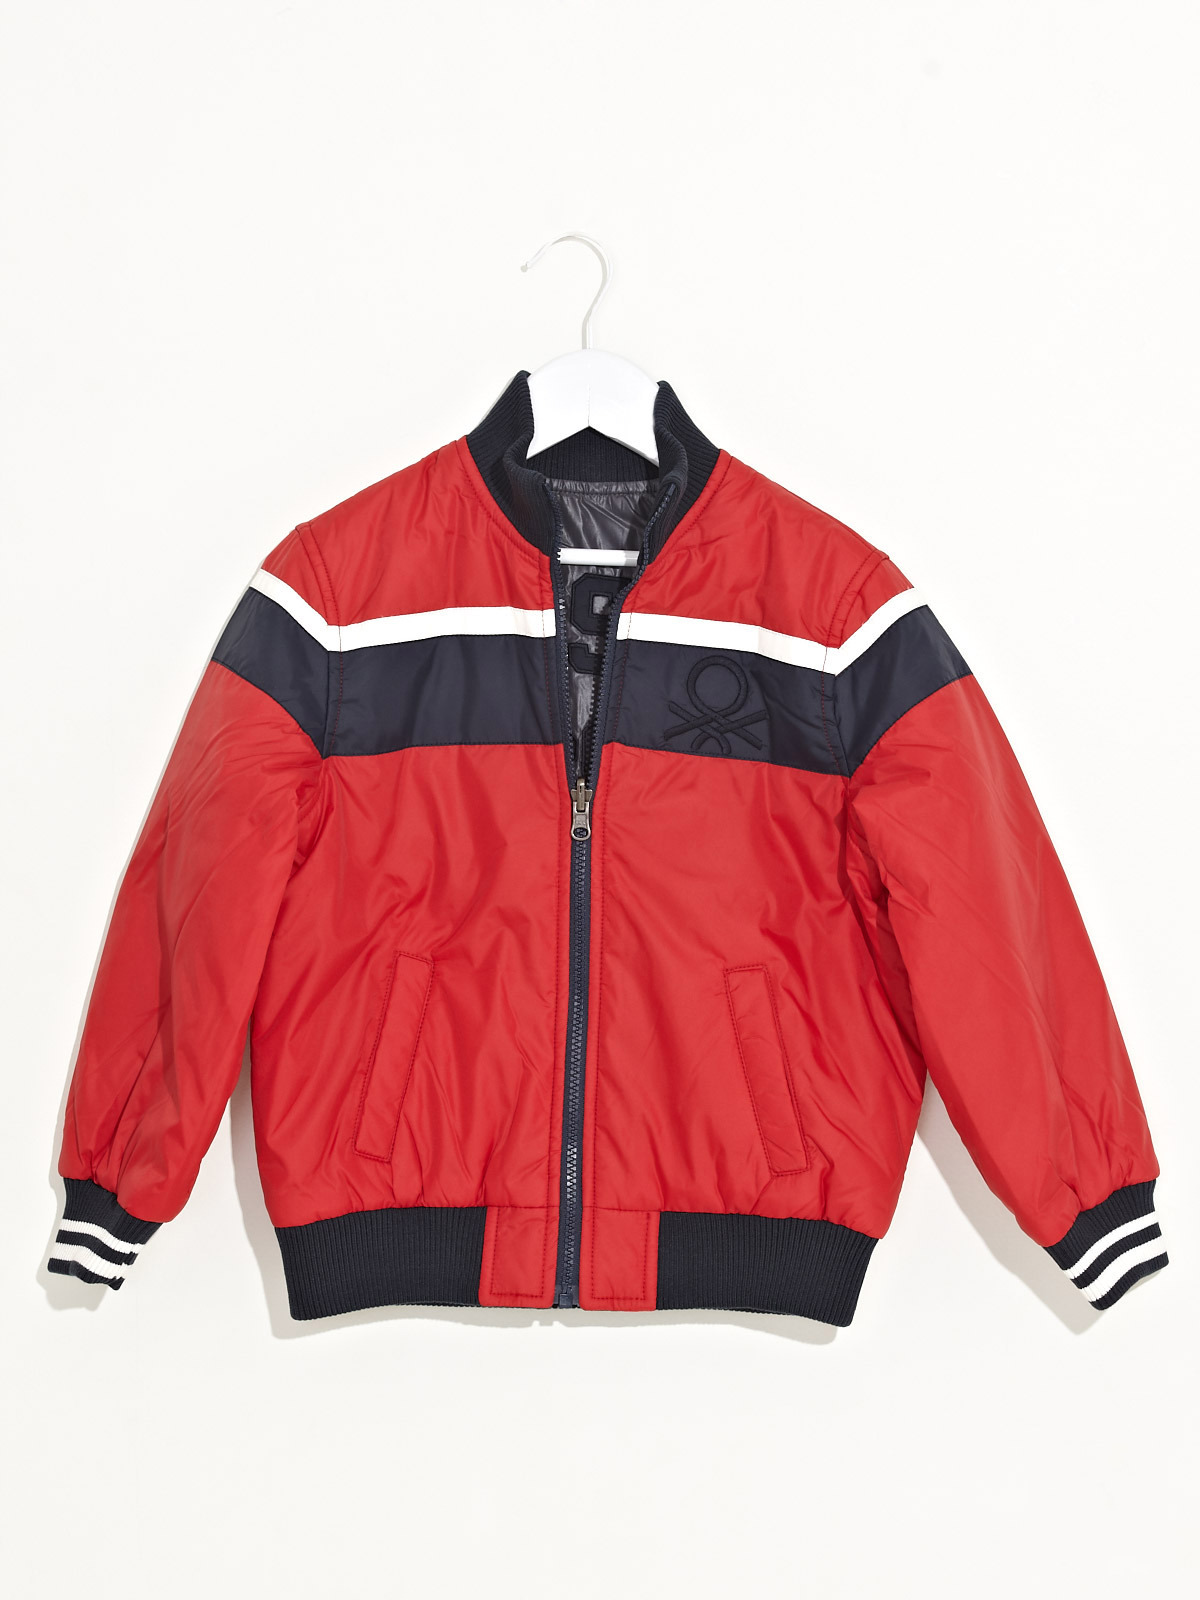 Buy Ucb Kids Quilted Reversible Jacket (Red) Online- Shopclues.com